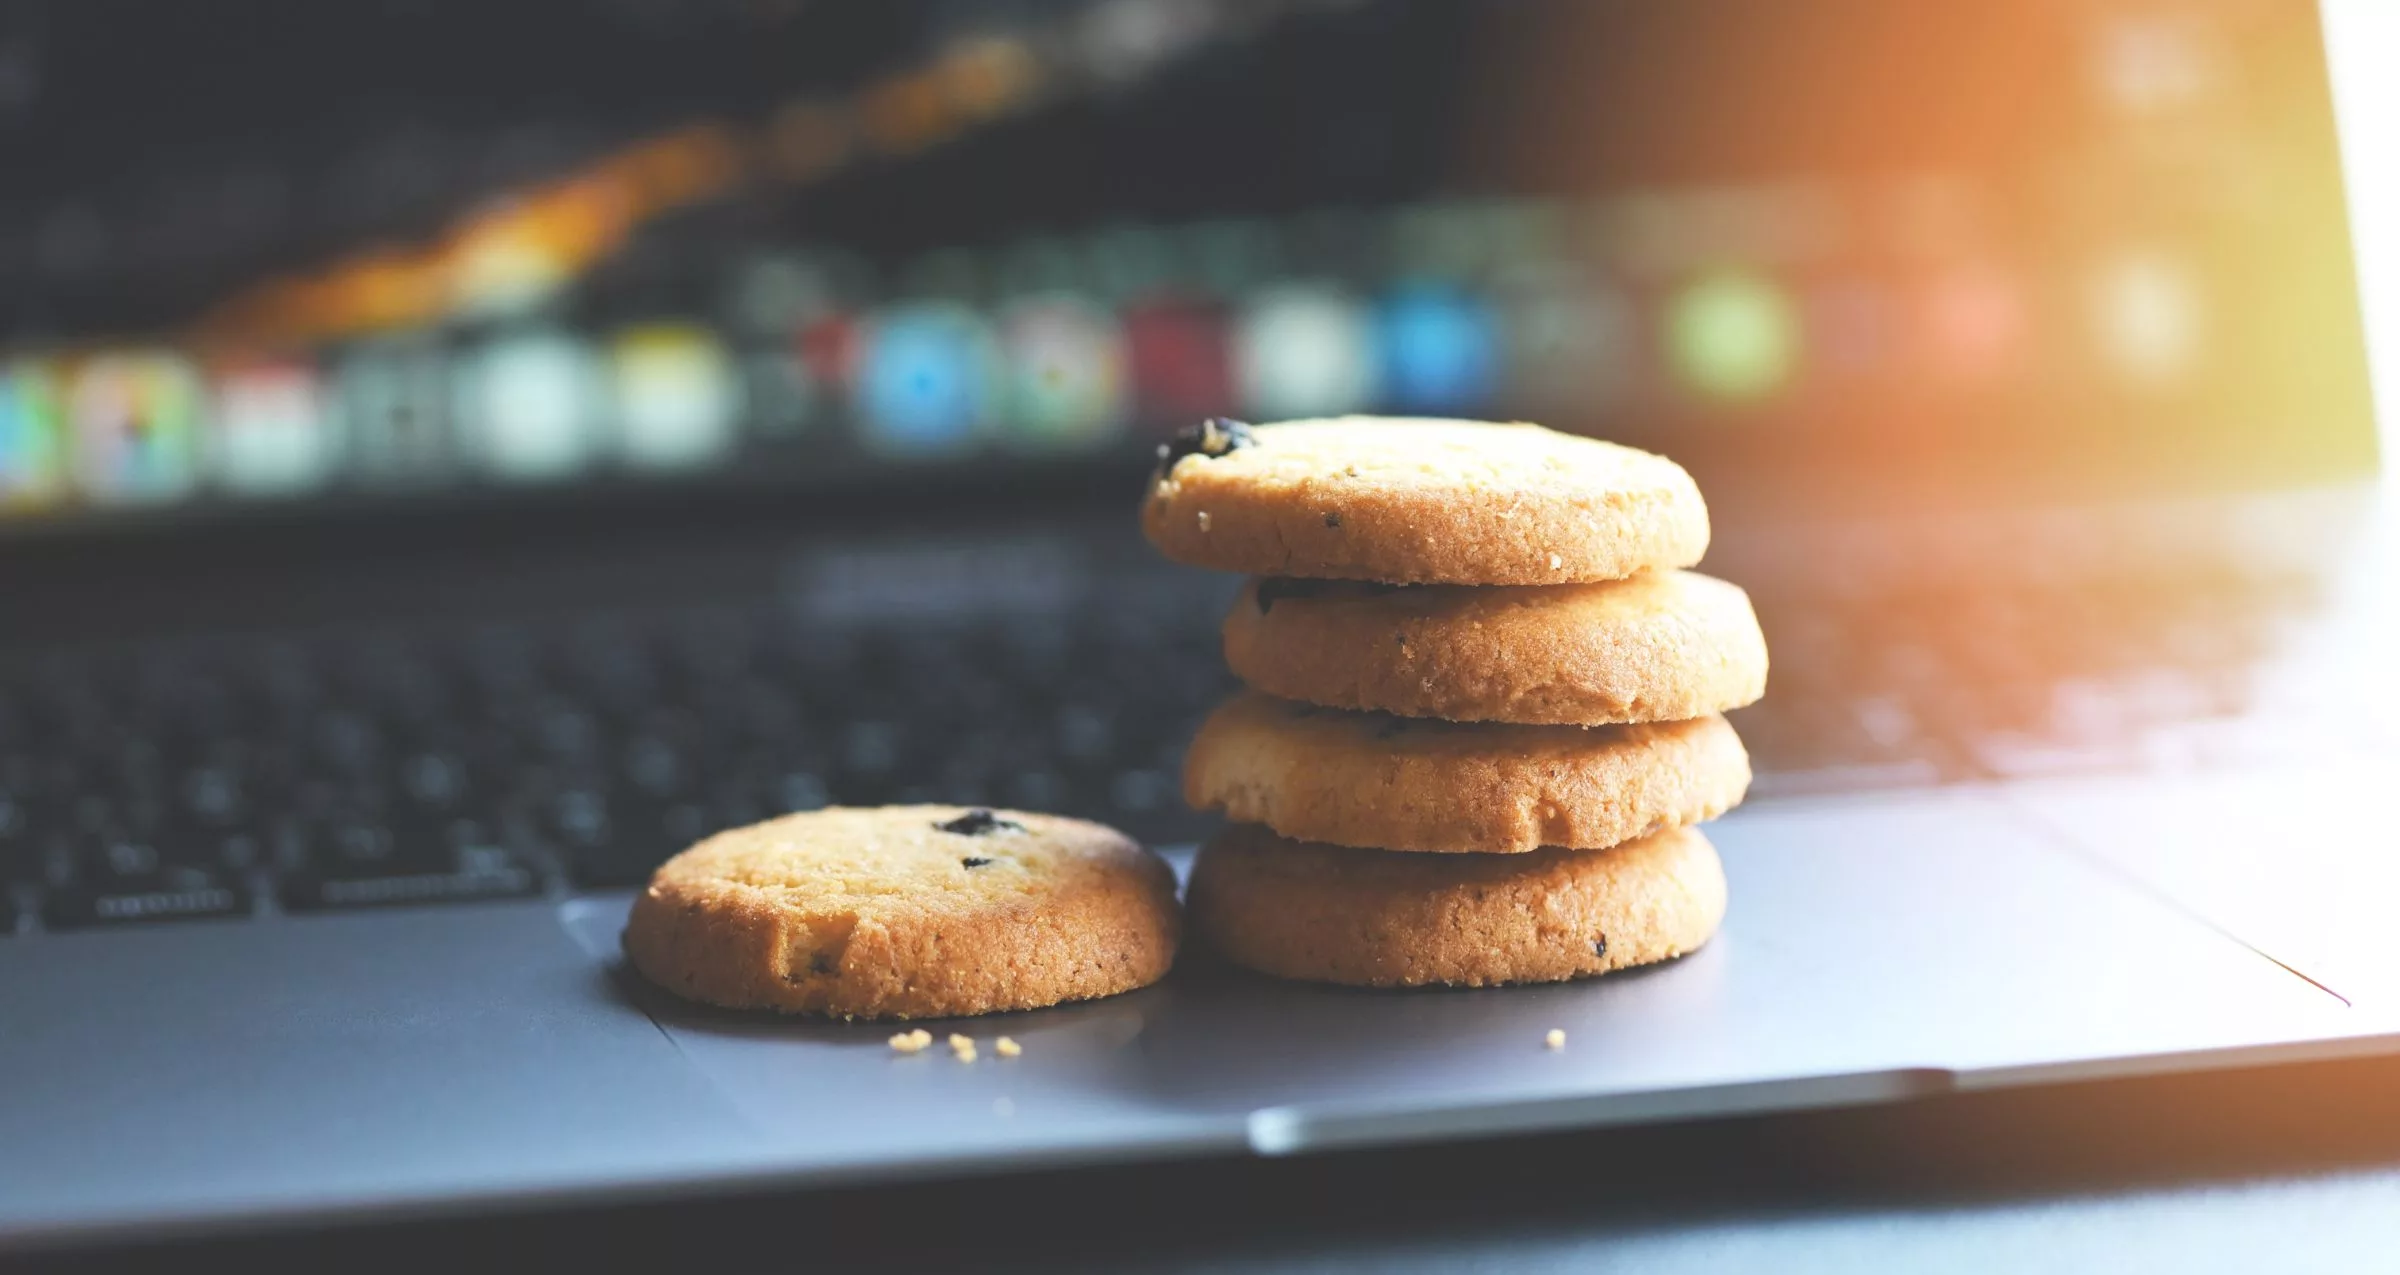 Image of cookies sitting on a laptop's keyboard to accompany blog post about cookie policies for websites.